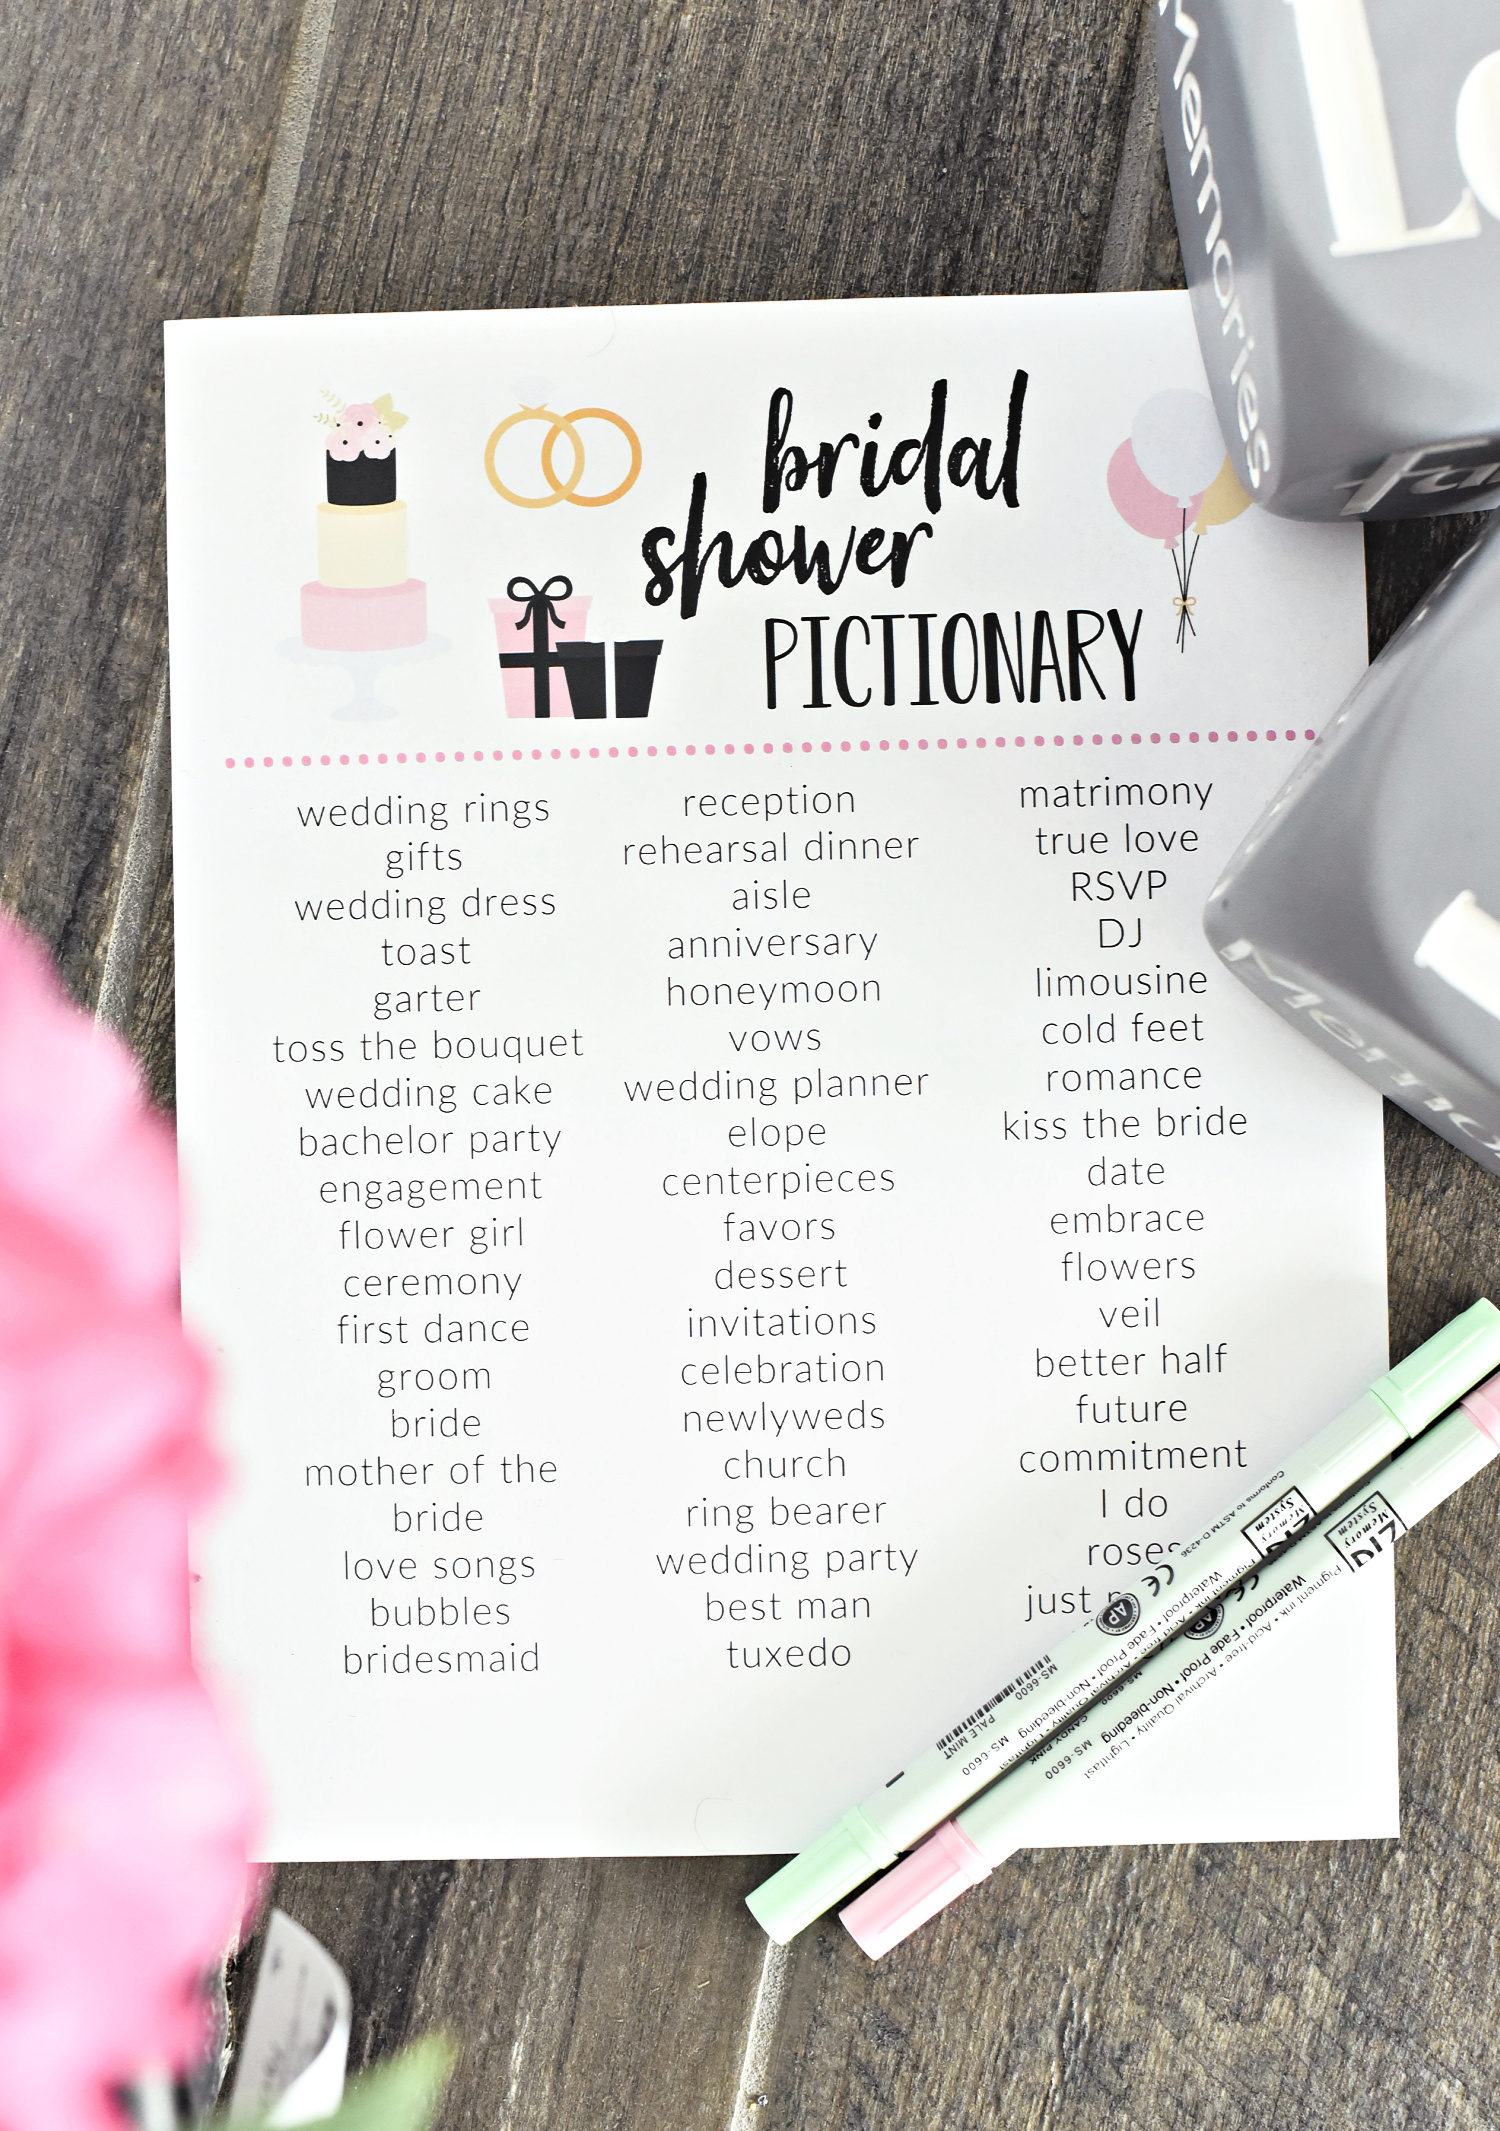 Bridal Shower Pictionary Game-all you need to do is print and play this fun bridal shower game. #bridalshower #games #bridalshowergames #bridalshowerideas